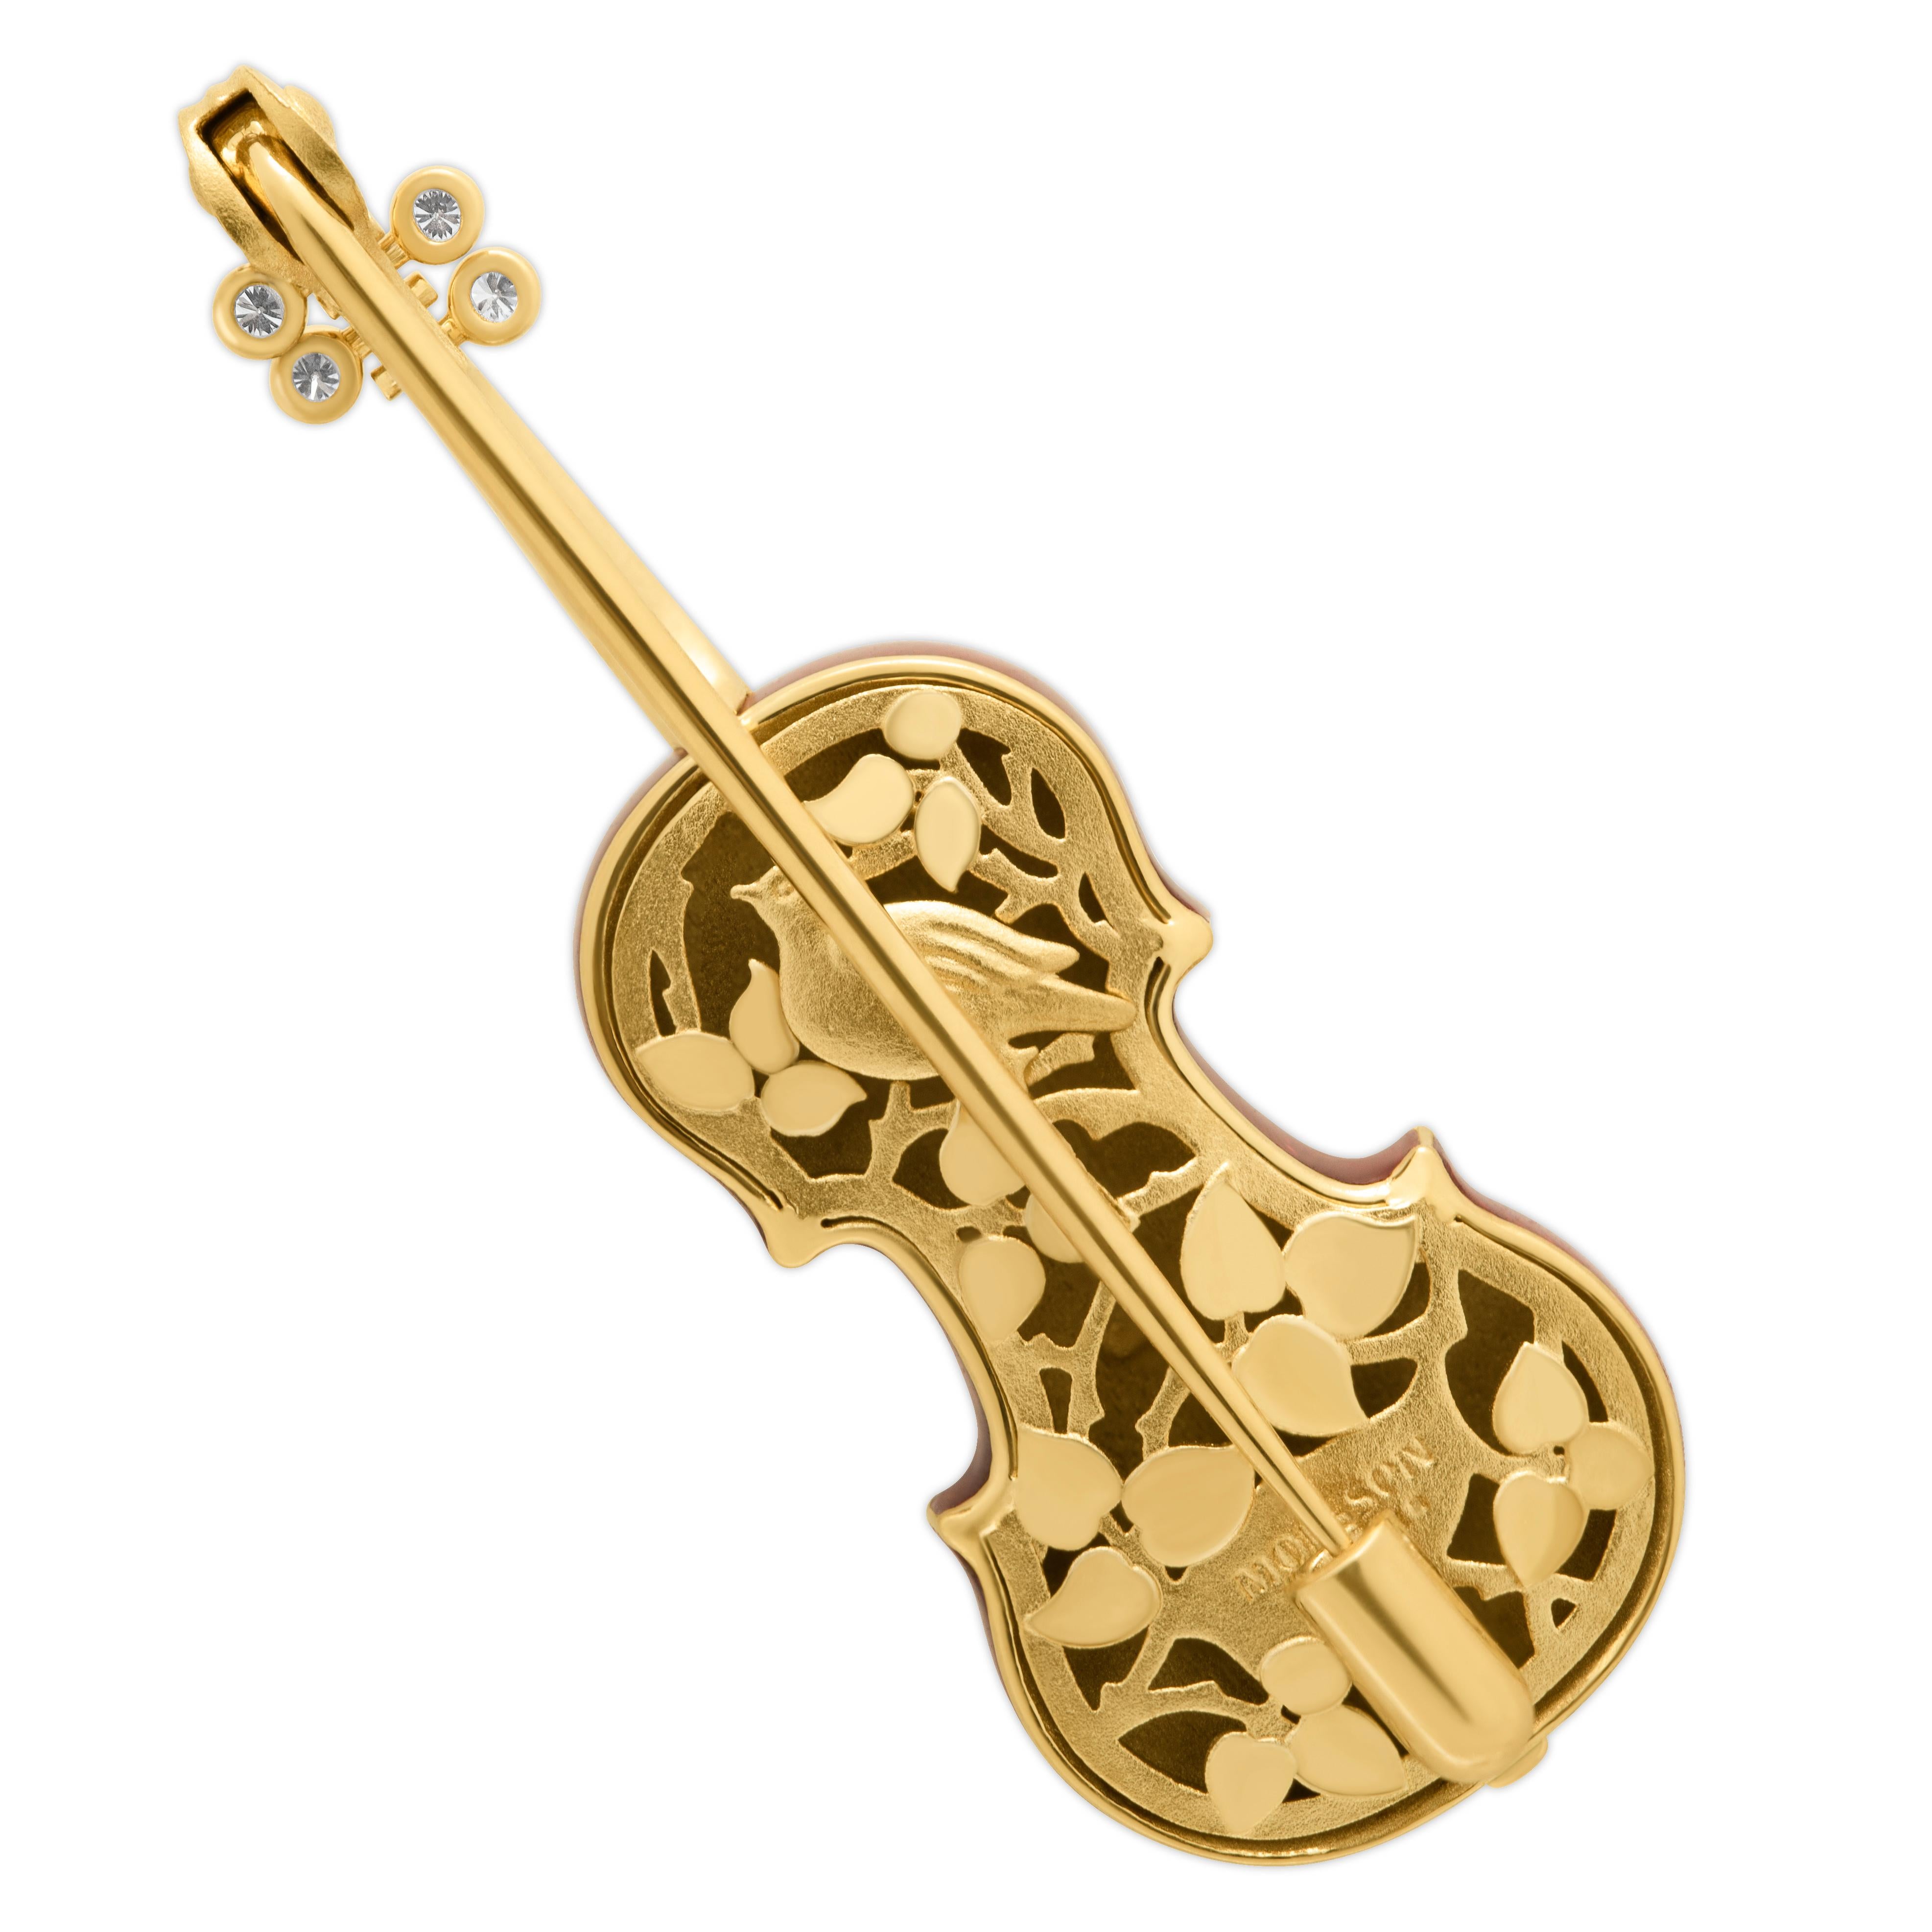 Classical Enamel Diamond 18 Karat Yellow Gold Mini Violin Brooch

This 18K Gold Enamel Violin Brooch is a work of art! Our signature item from Artistic Collection, it boasts realistic texture of real wood and transparent enamel, along with singing